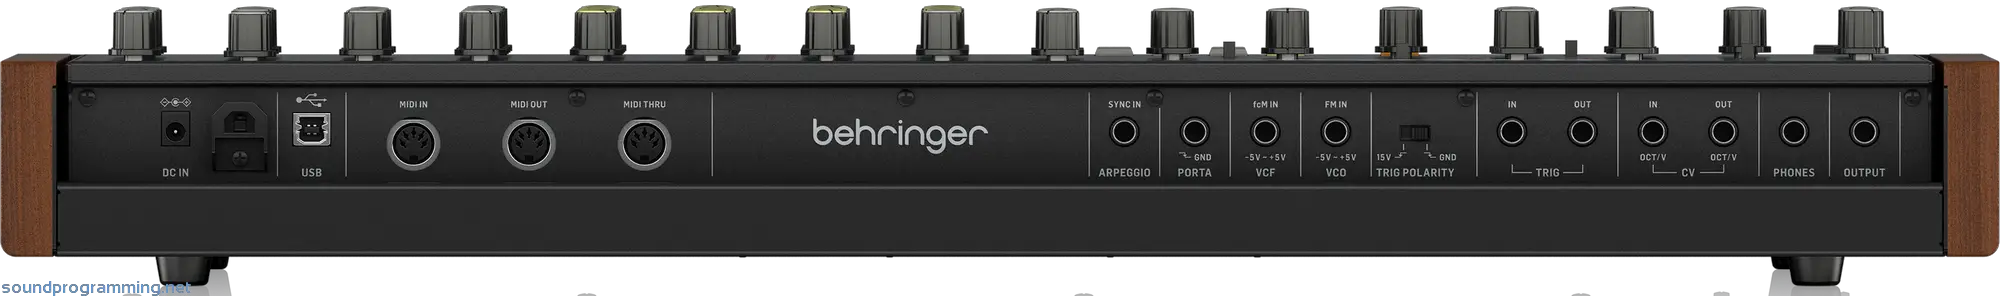 Behringer Monopoly Back View